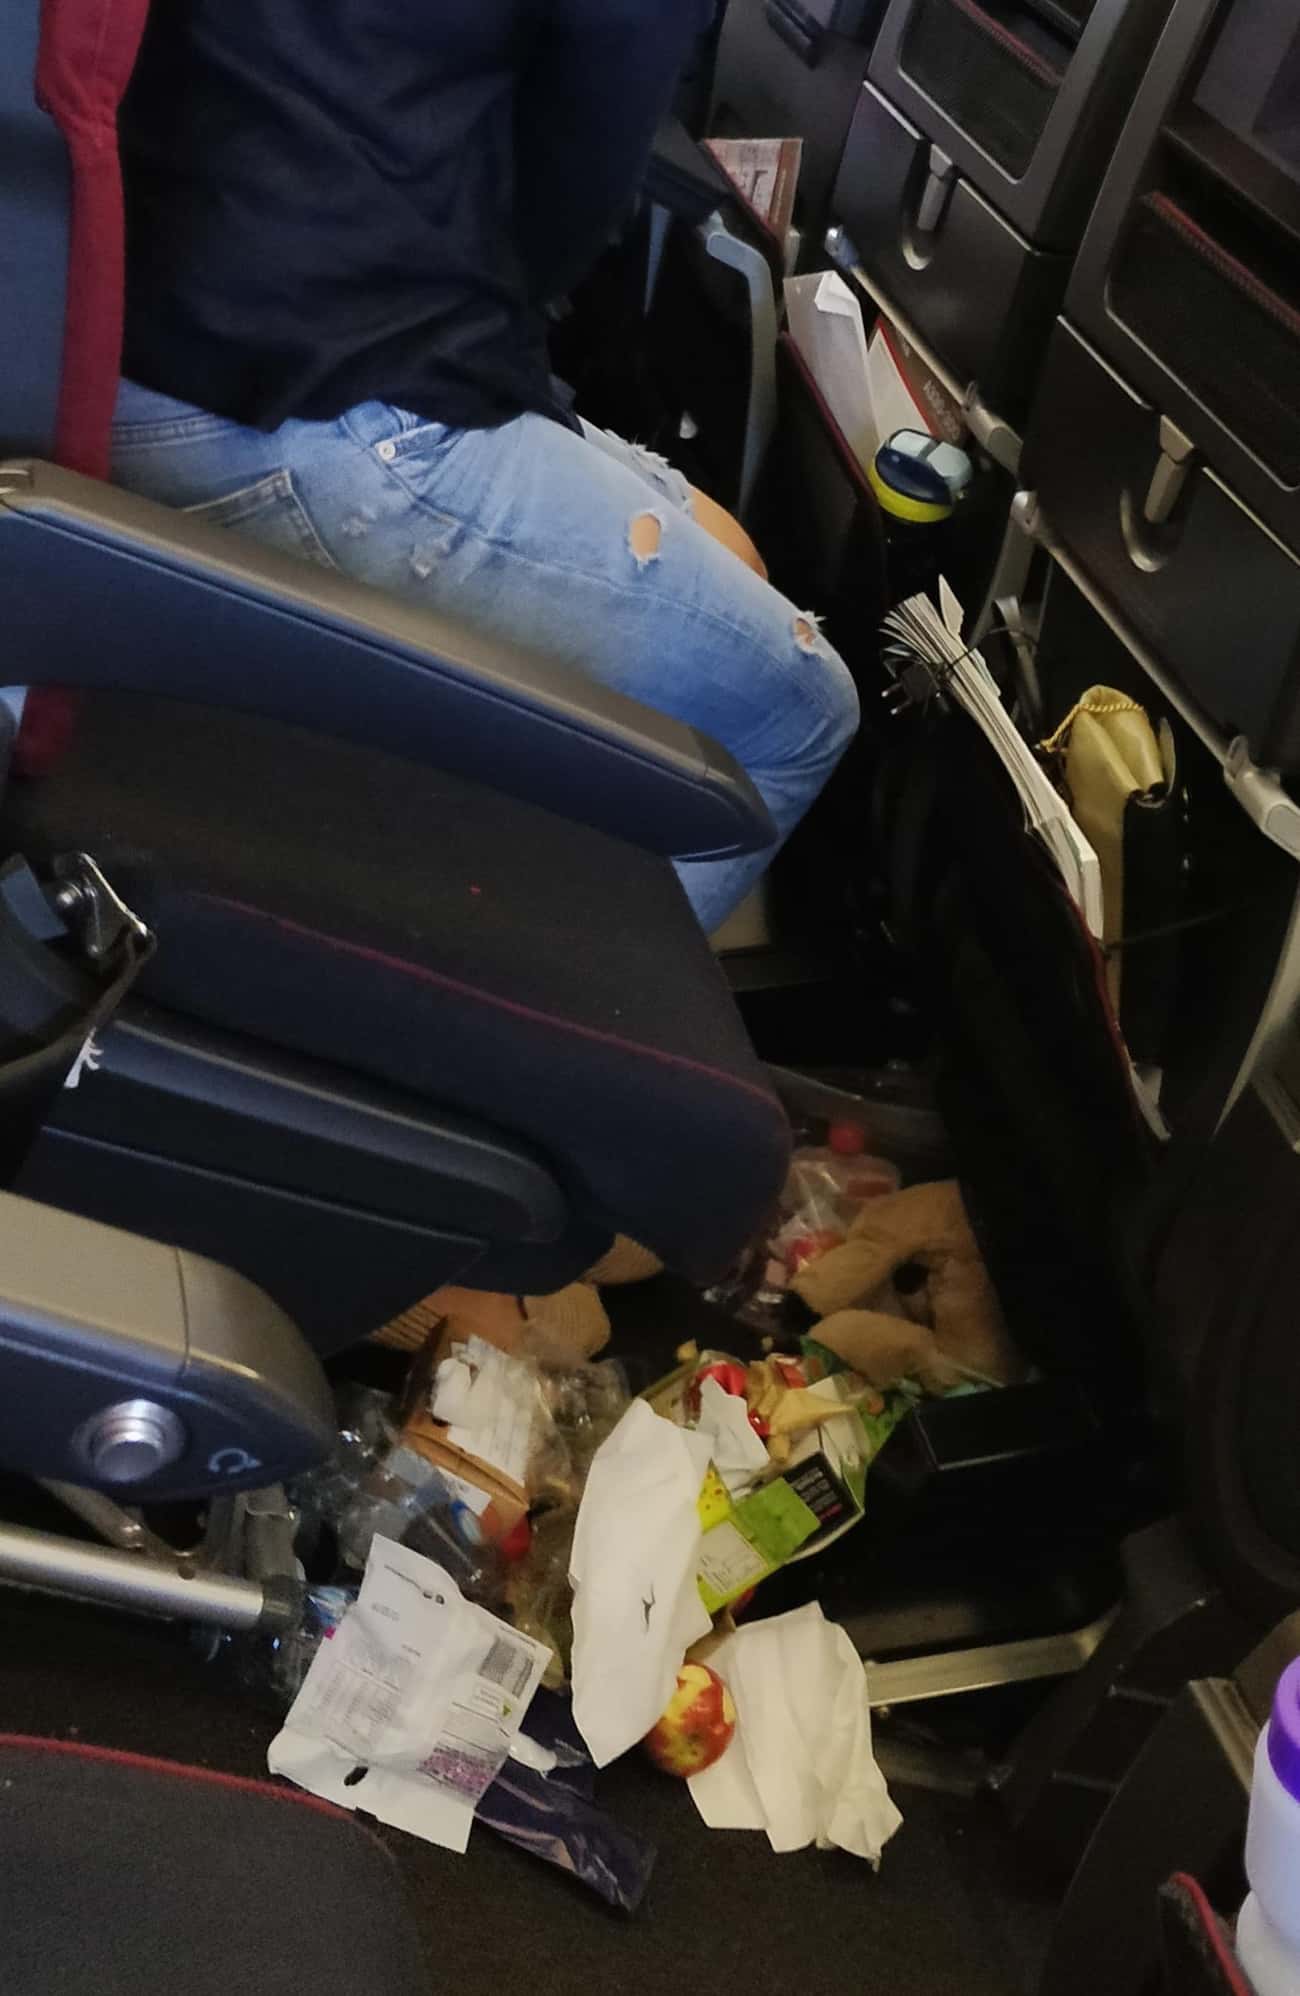 "Apparently The Plane Turned Into A Garbage Dump Mid-Flight"